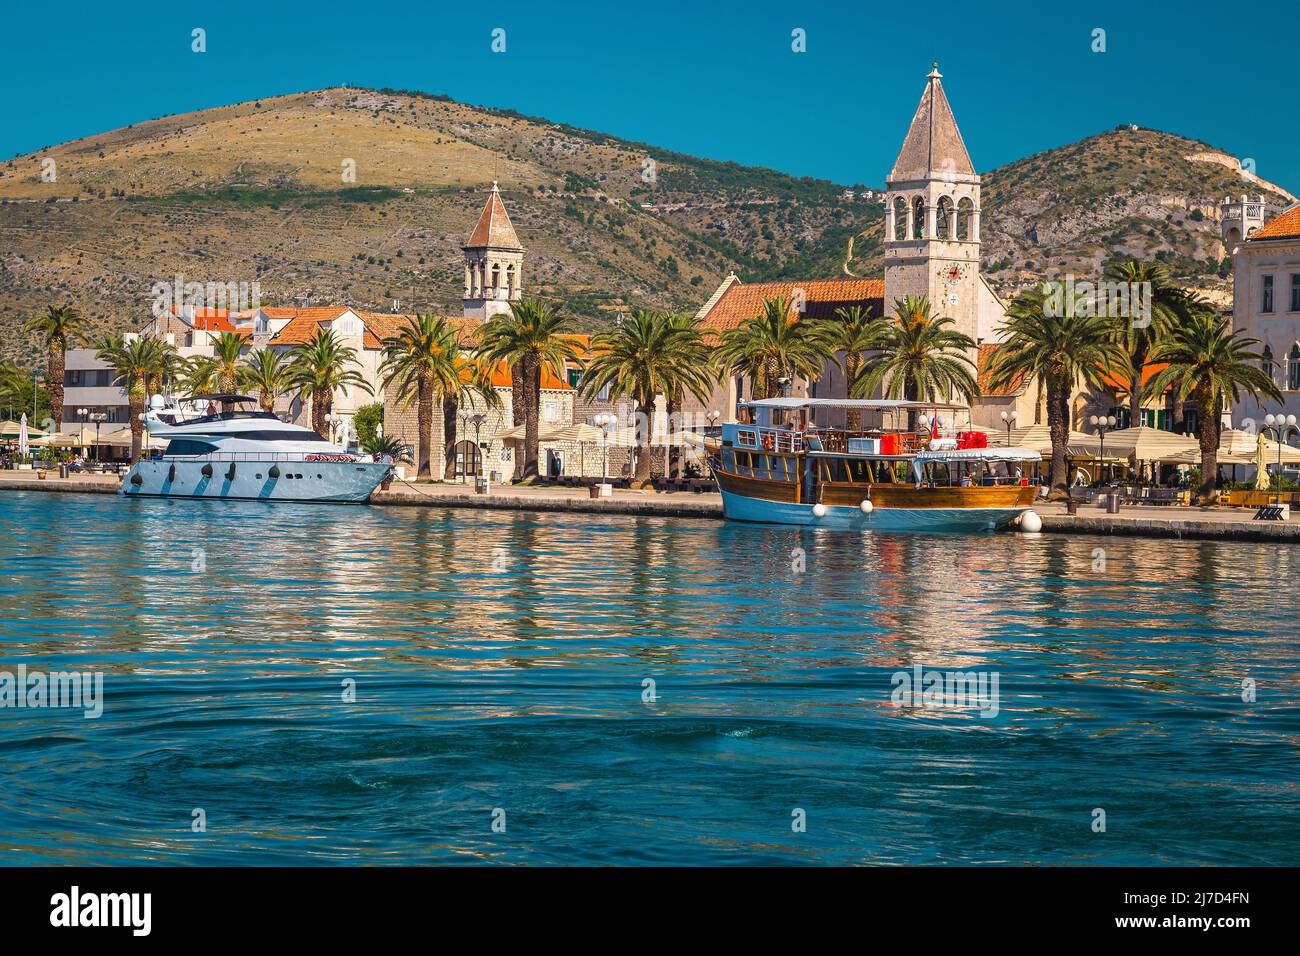 Amazing view with luxury yacht and old ship in the touristic harbor. Spectacular waterfront promenade with palms and street cafes, Trogir, Dalmatia, C Stock Photo